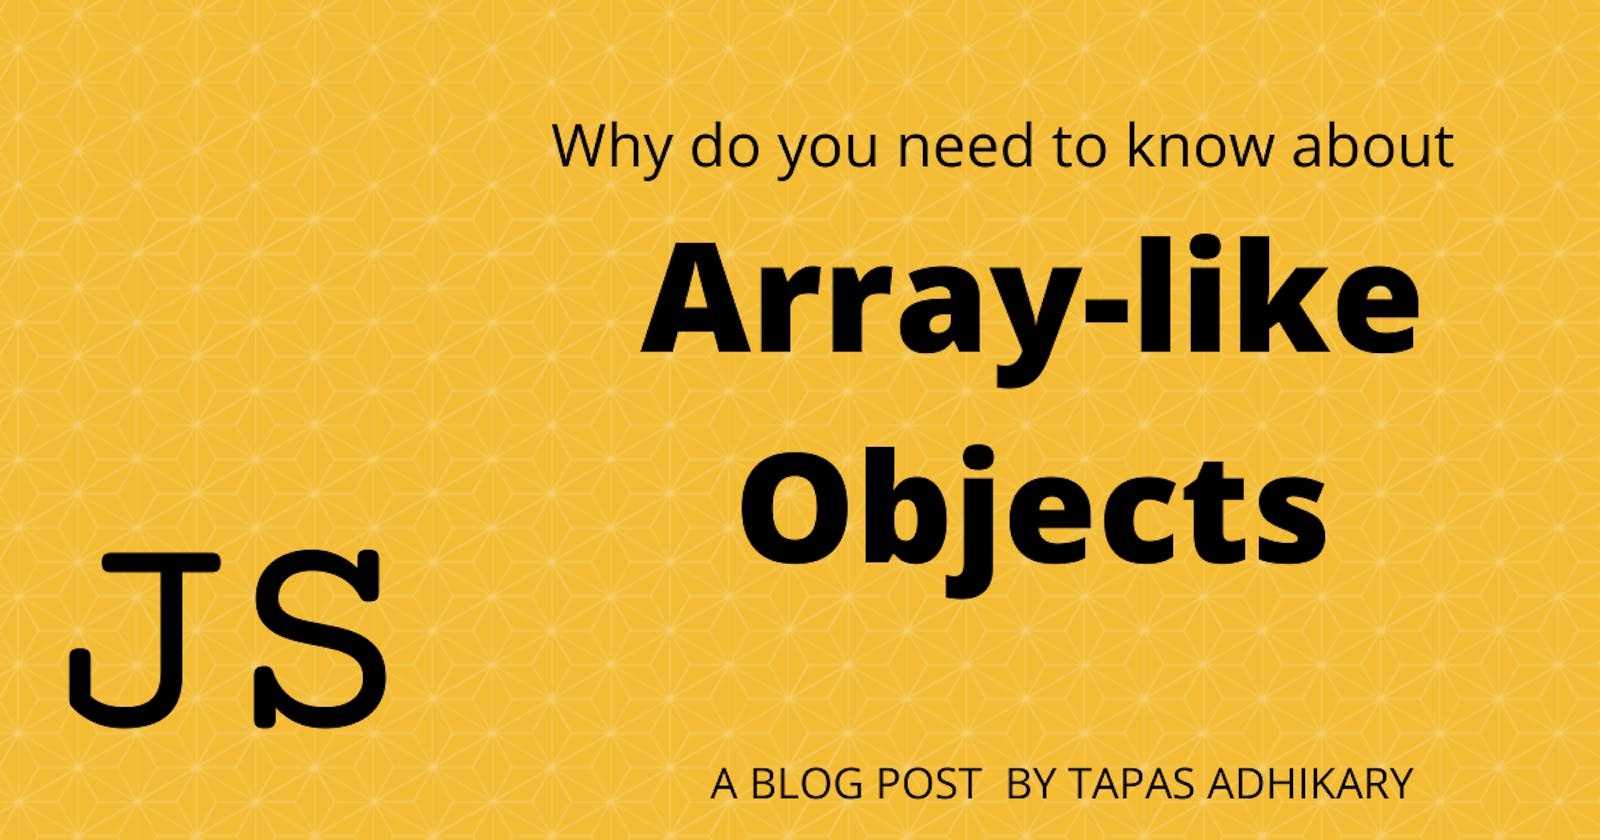 Why do you need to know about Array-like Objects?